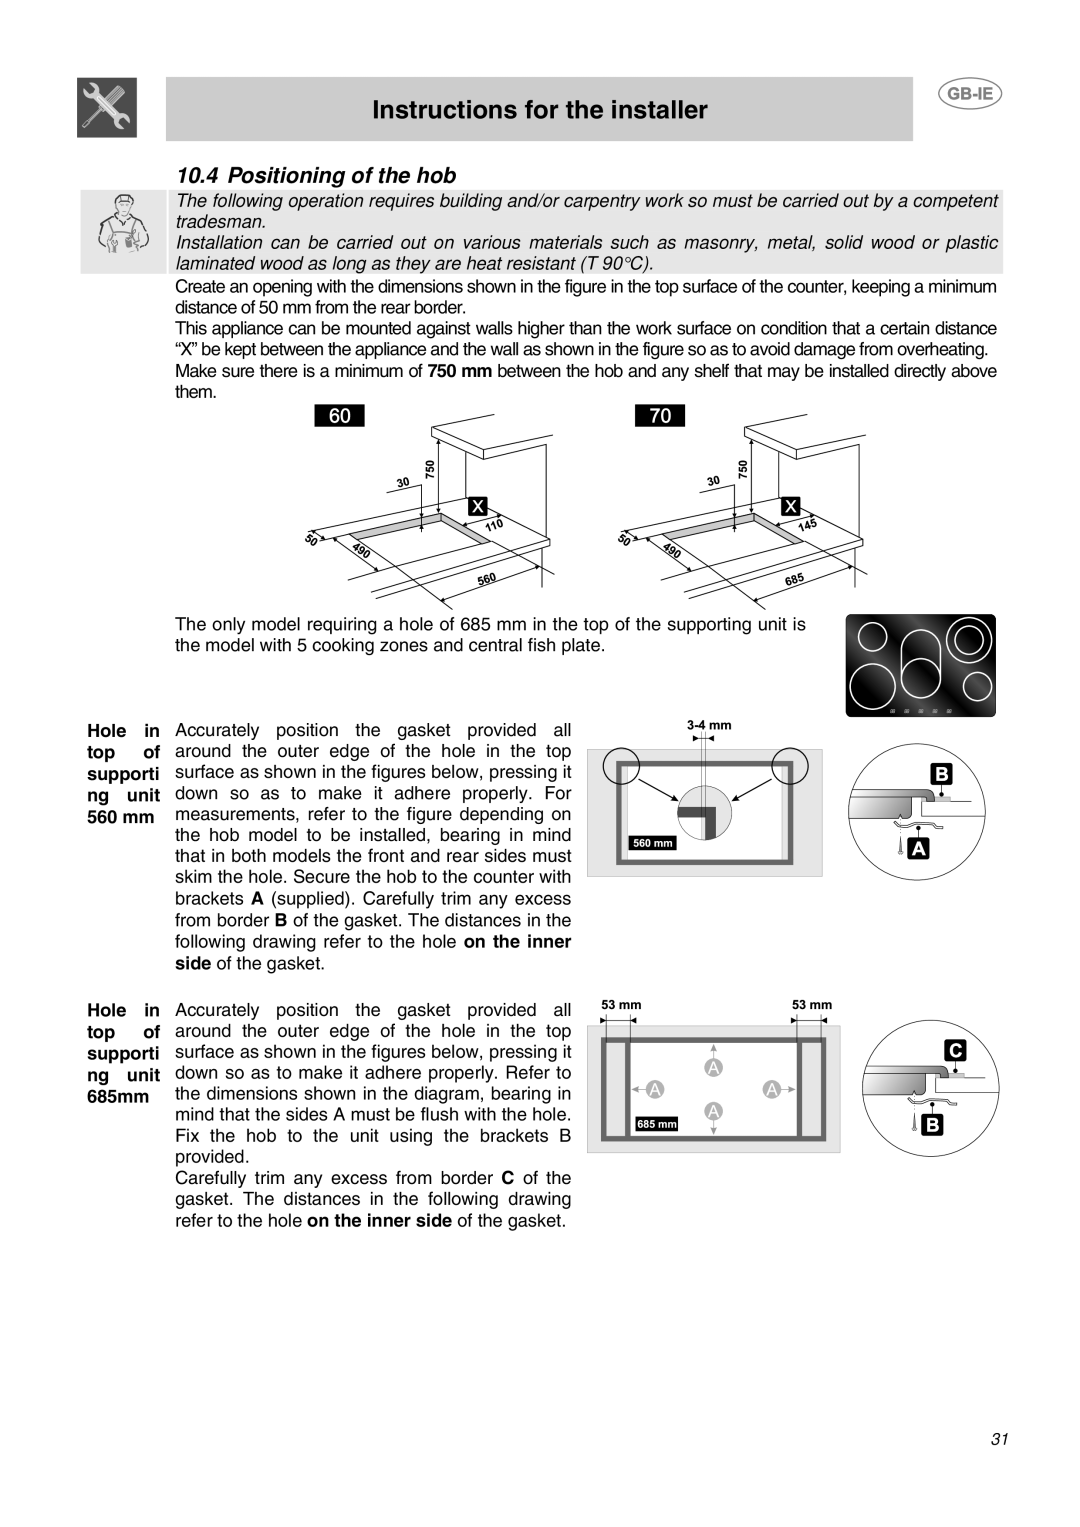 Smeg P662-1, P652, P662B-1 manual Instructions for the installer, Hole in top of supporti ng unit 560 mm, 685mm 